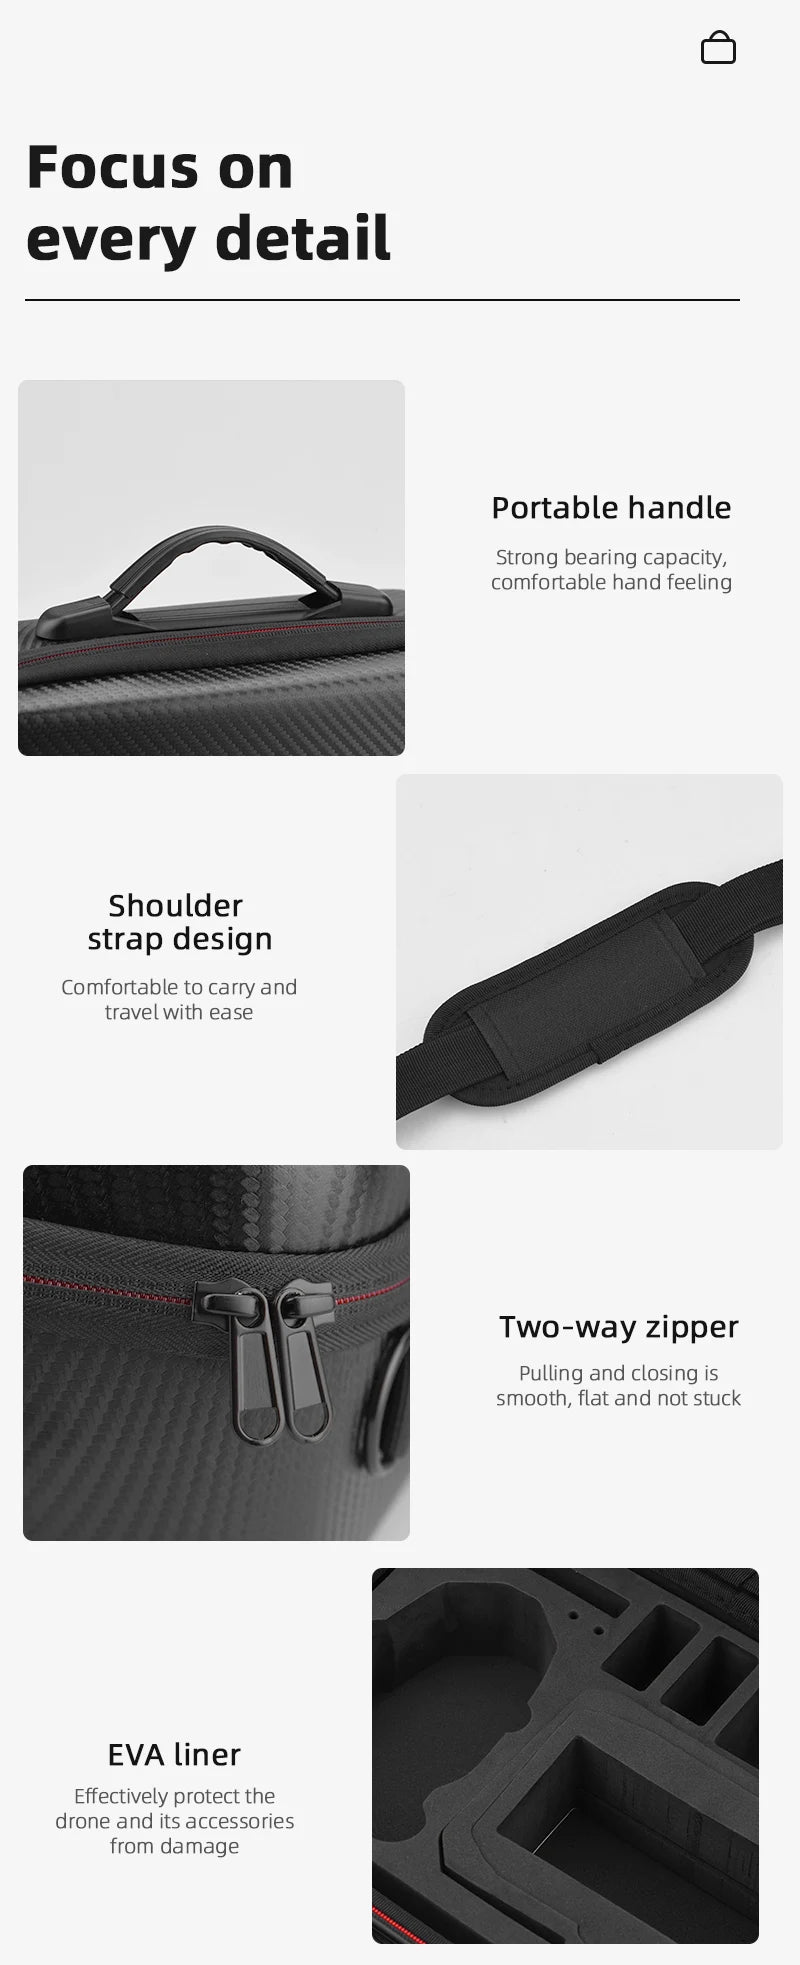 focus on every detail Portable handle Strong bearing capacity, comfortable hand feeling Shoulder strap design Comfortable